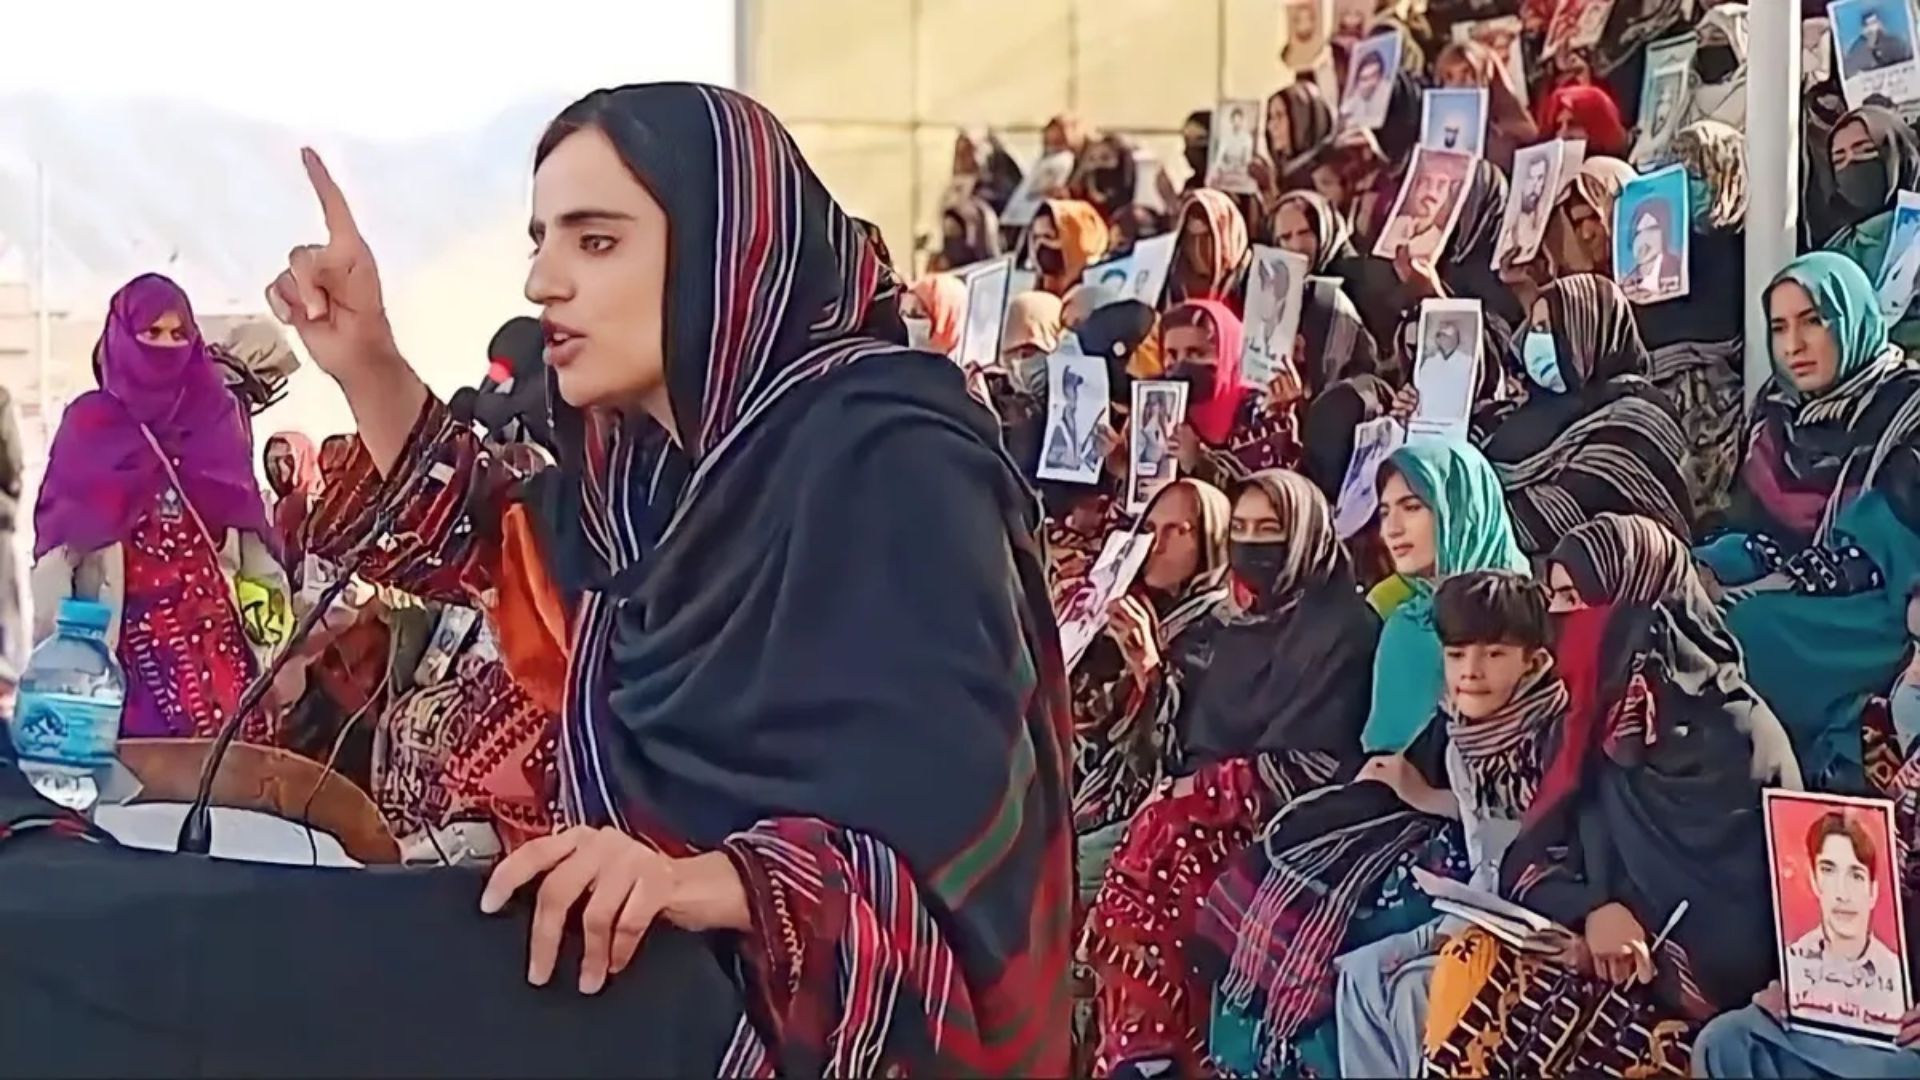 Meet Mahrang Baloch, young activist leading a ‘revolution’ against the Pakistani Army